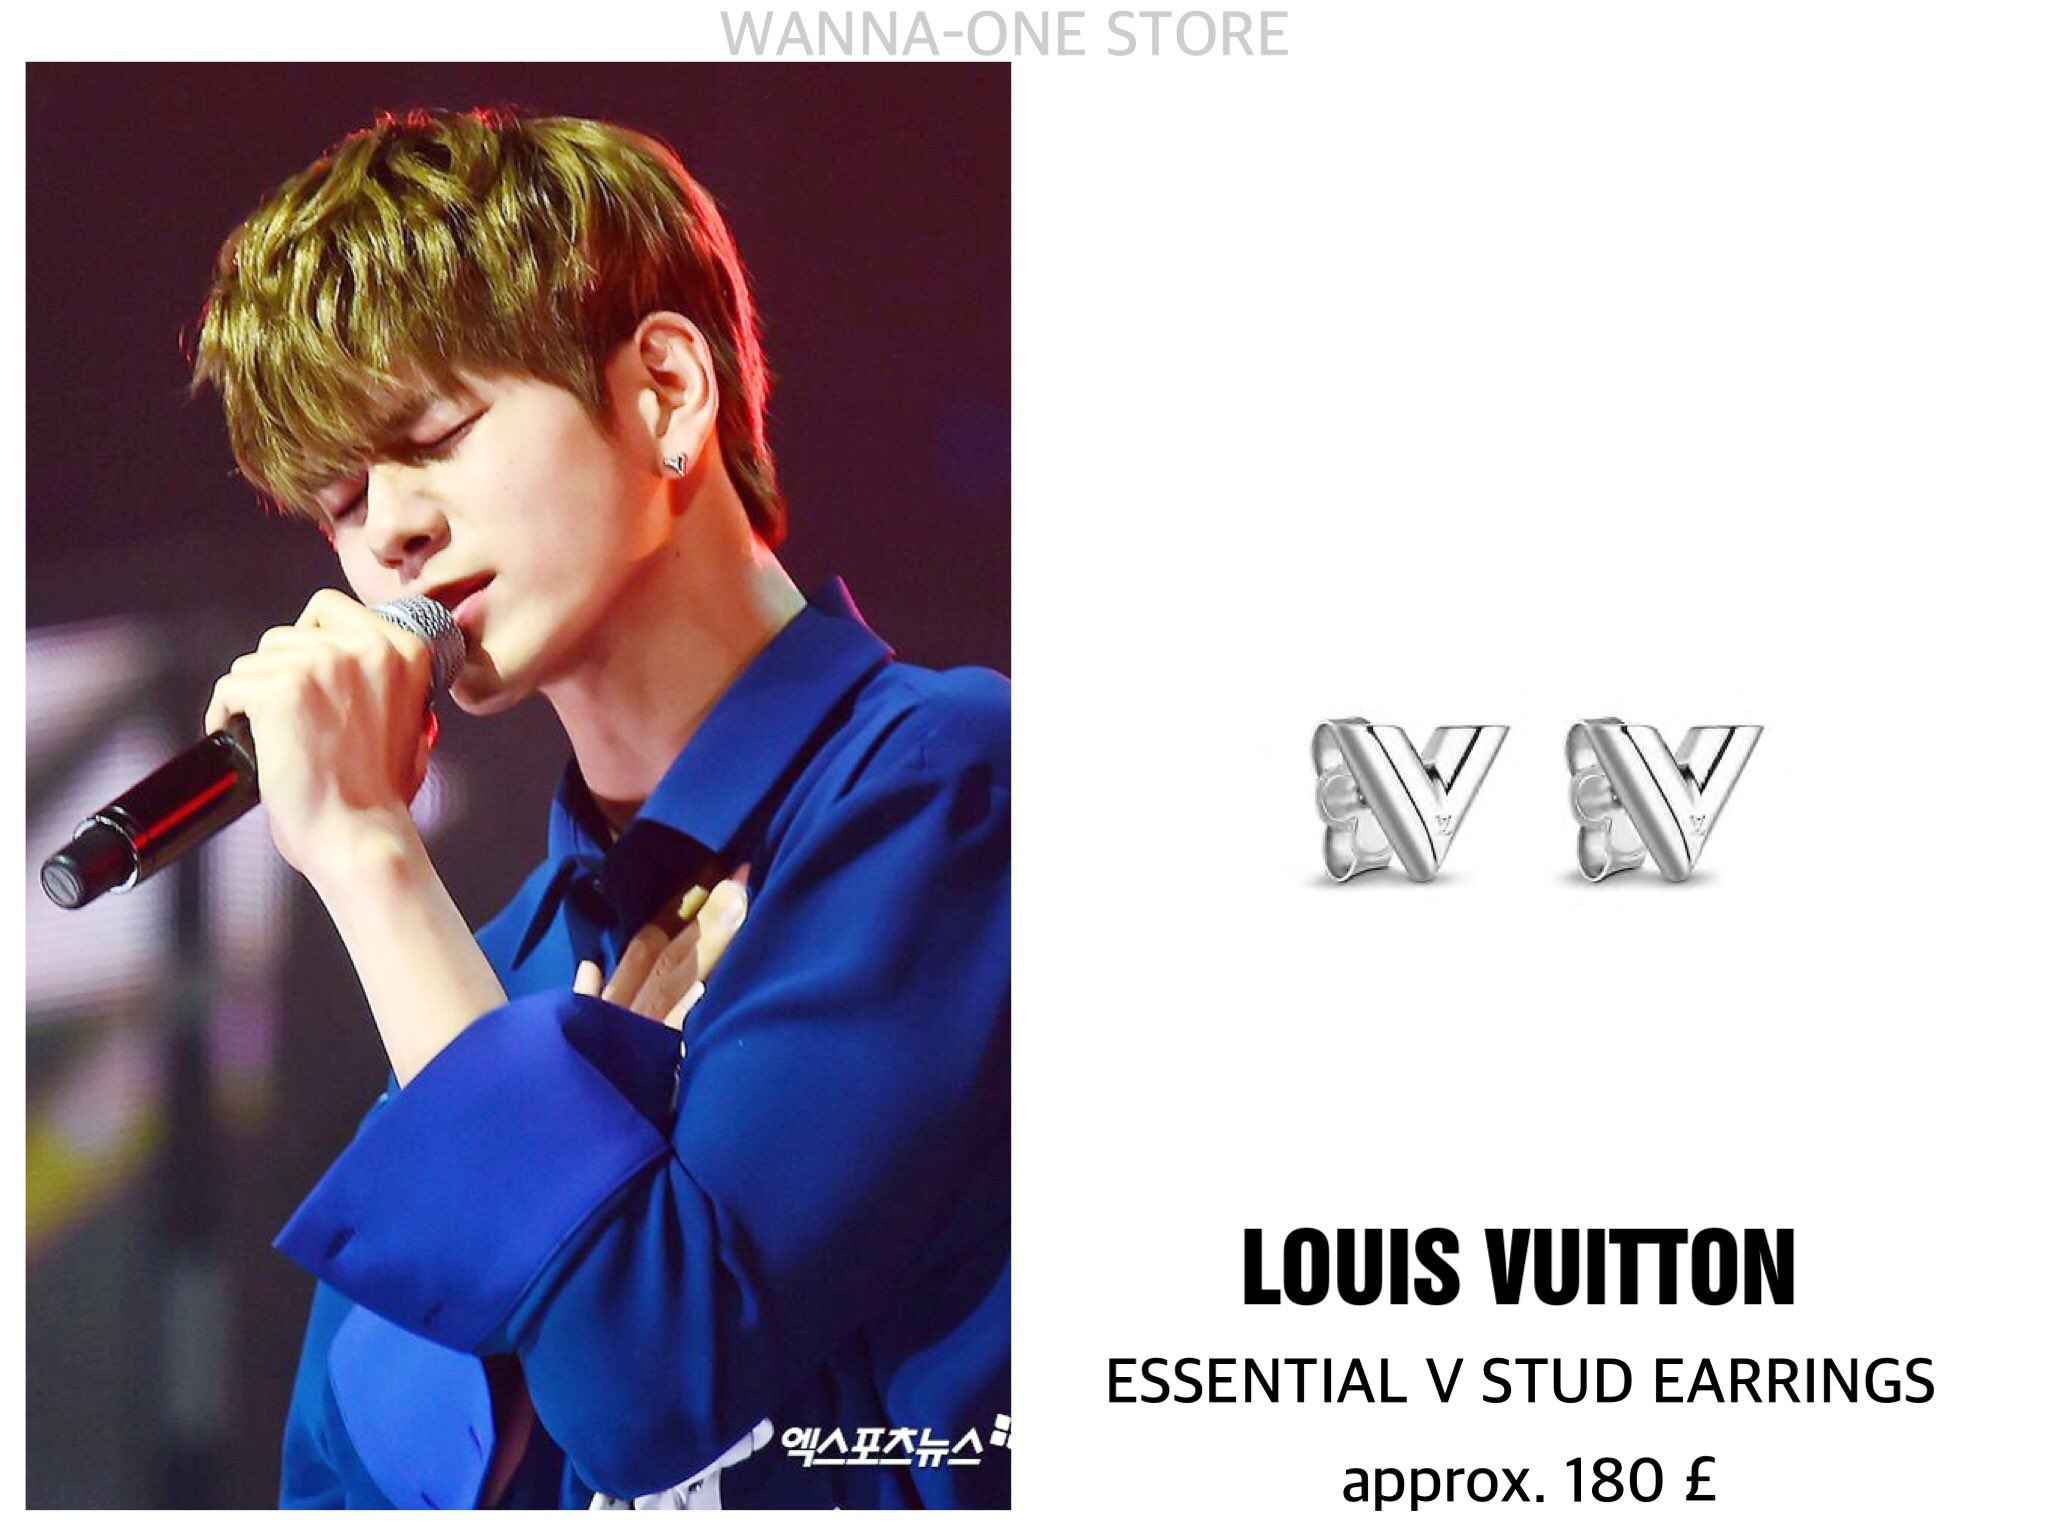 WANNA-ONE STORE on X: LOUIS VUITTON : ESSENTIAL V STUD EARRINGS